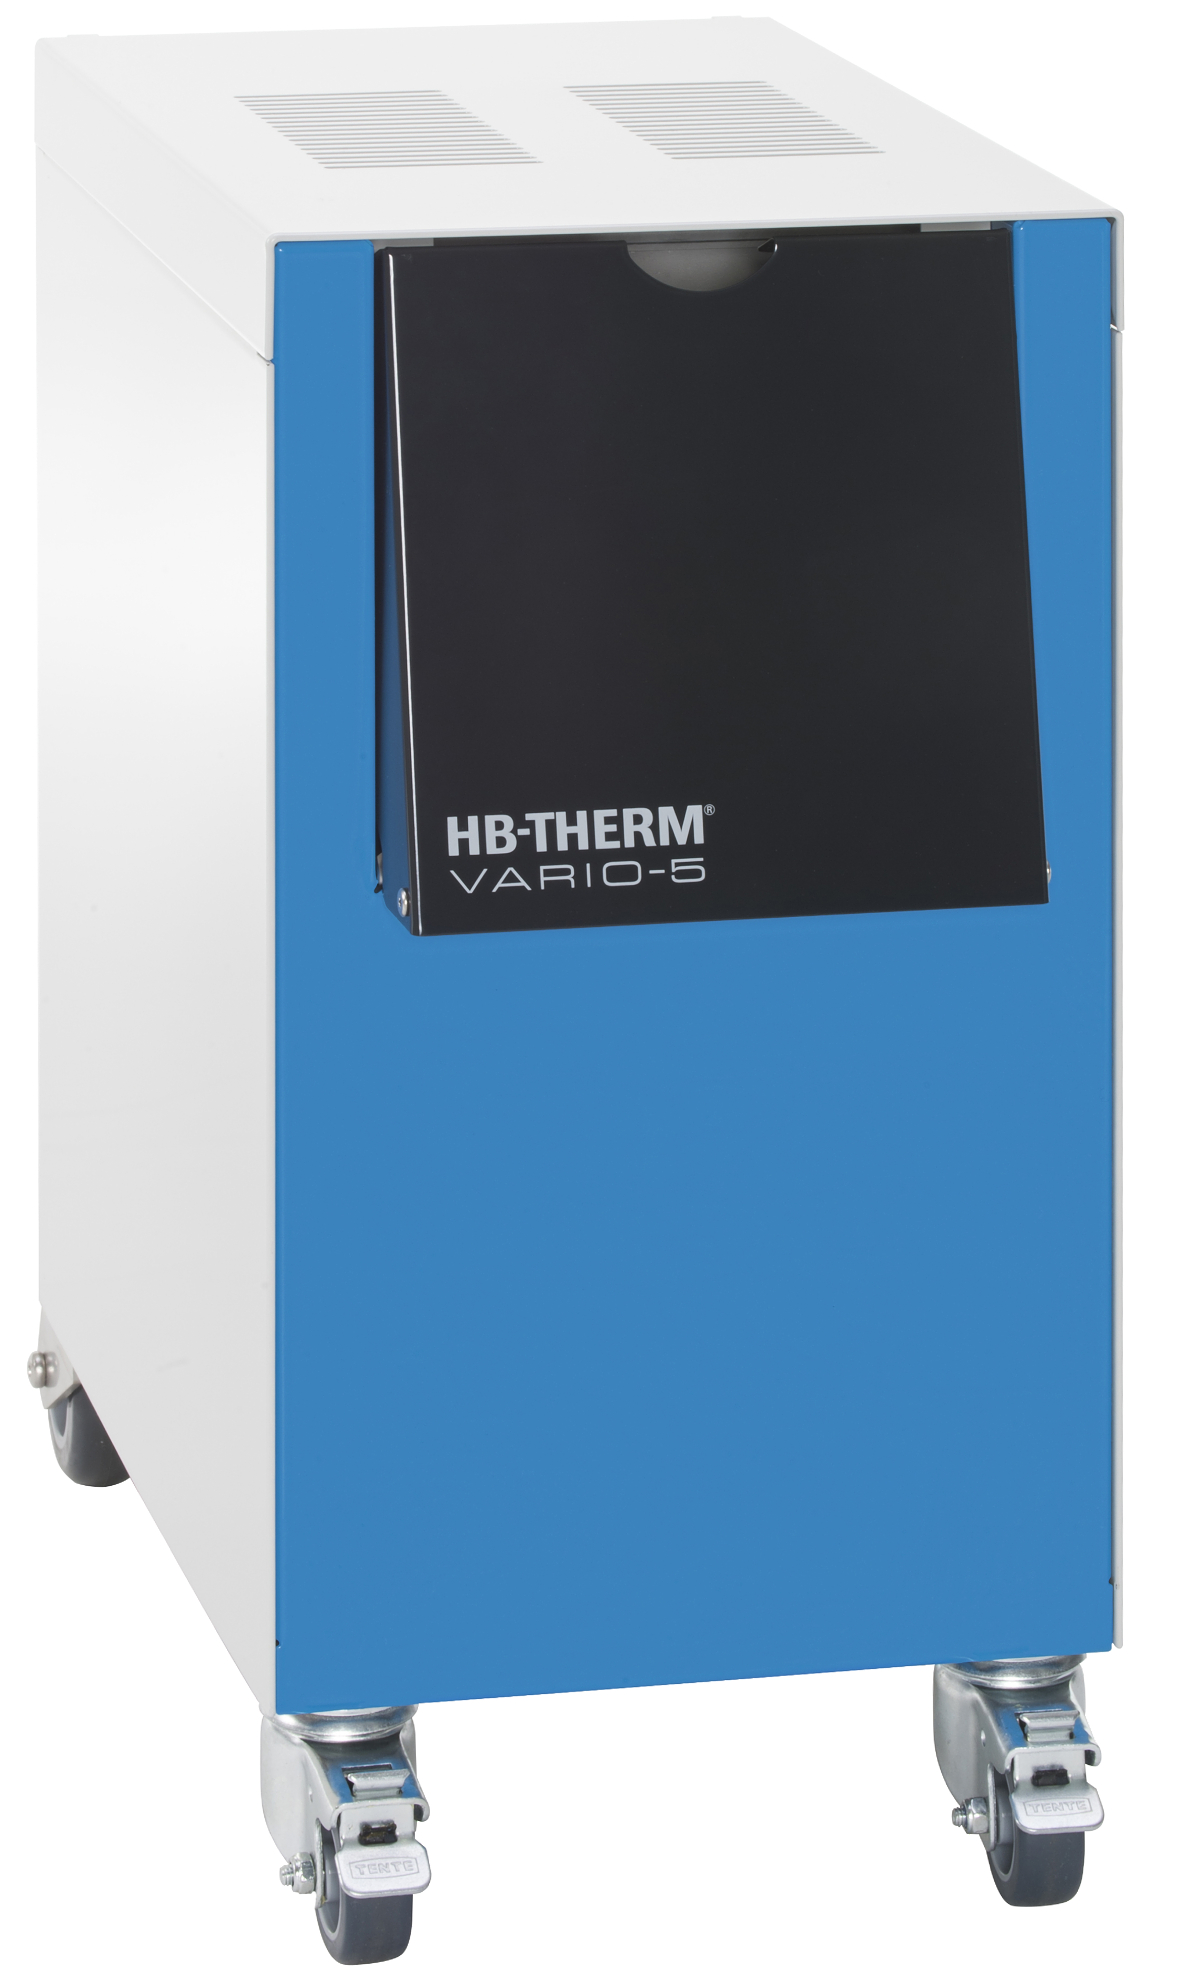 HB-Therm Vario-5